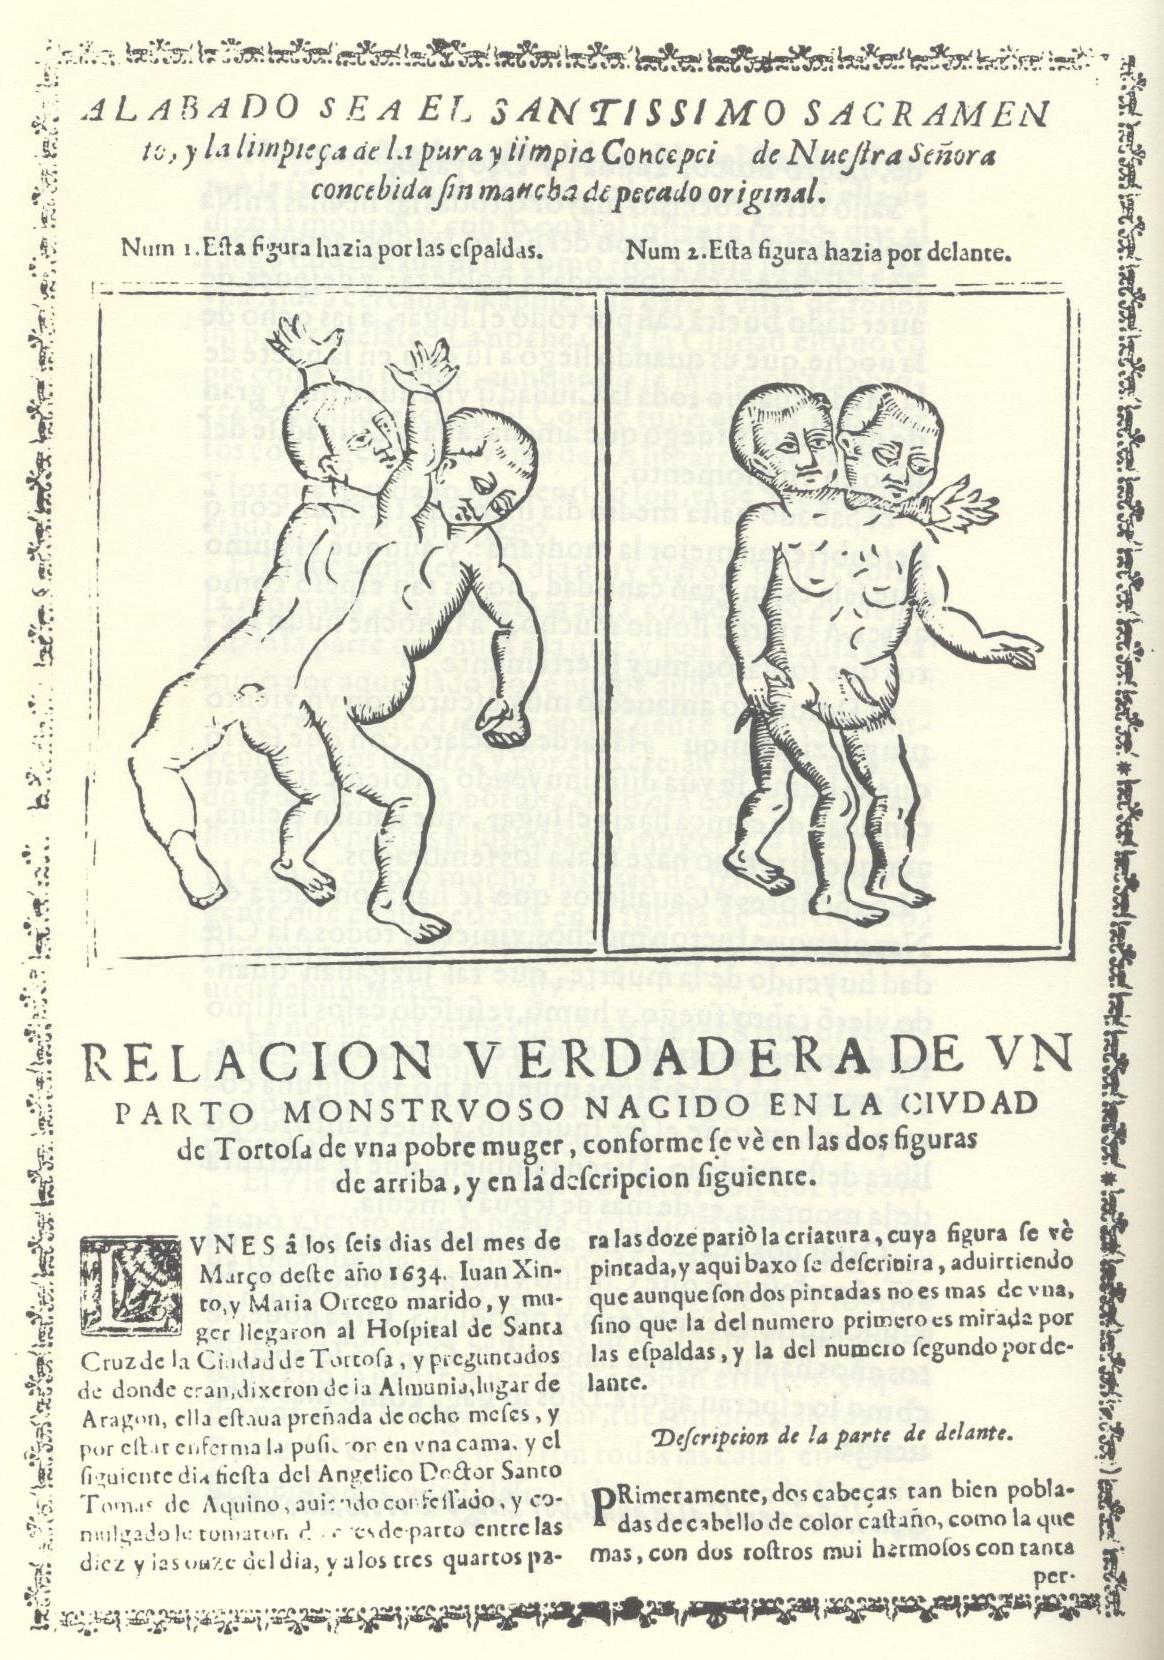 17th-century tabloid about a “monstrous birth” of conjoined twins. This is an example of tabloids that were written about inexplicable moments in life. Photo provided by Hilaire Kallendorf.